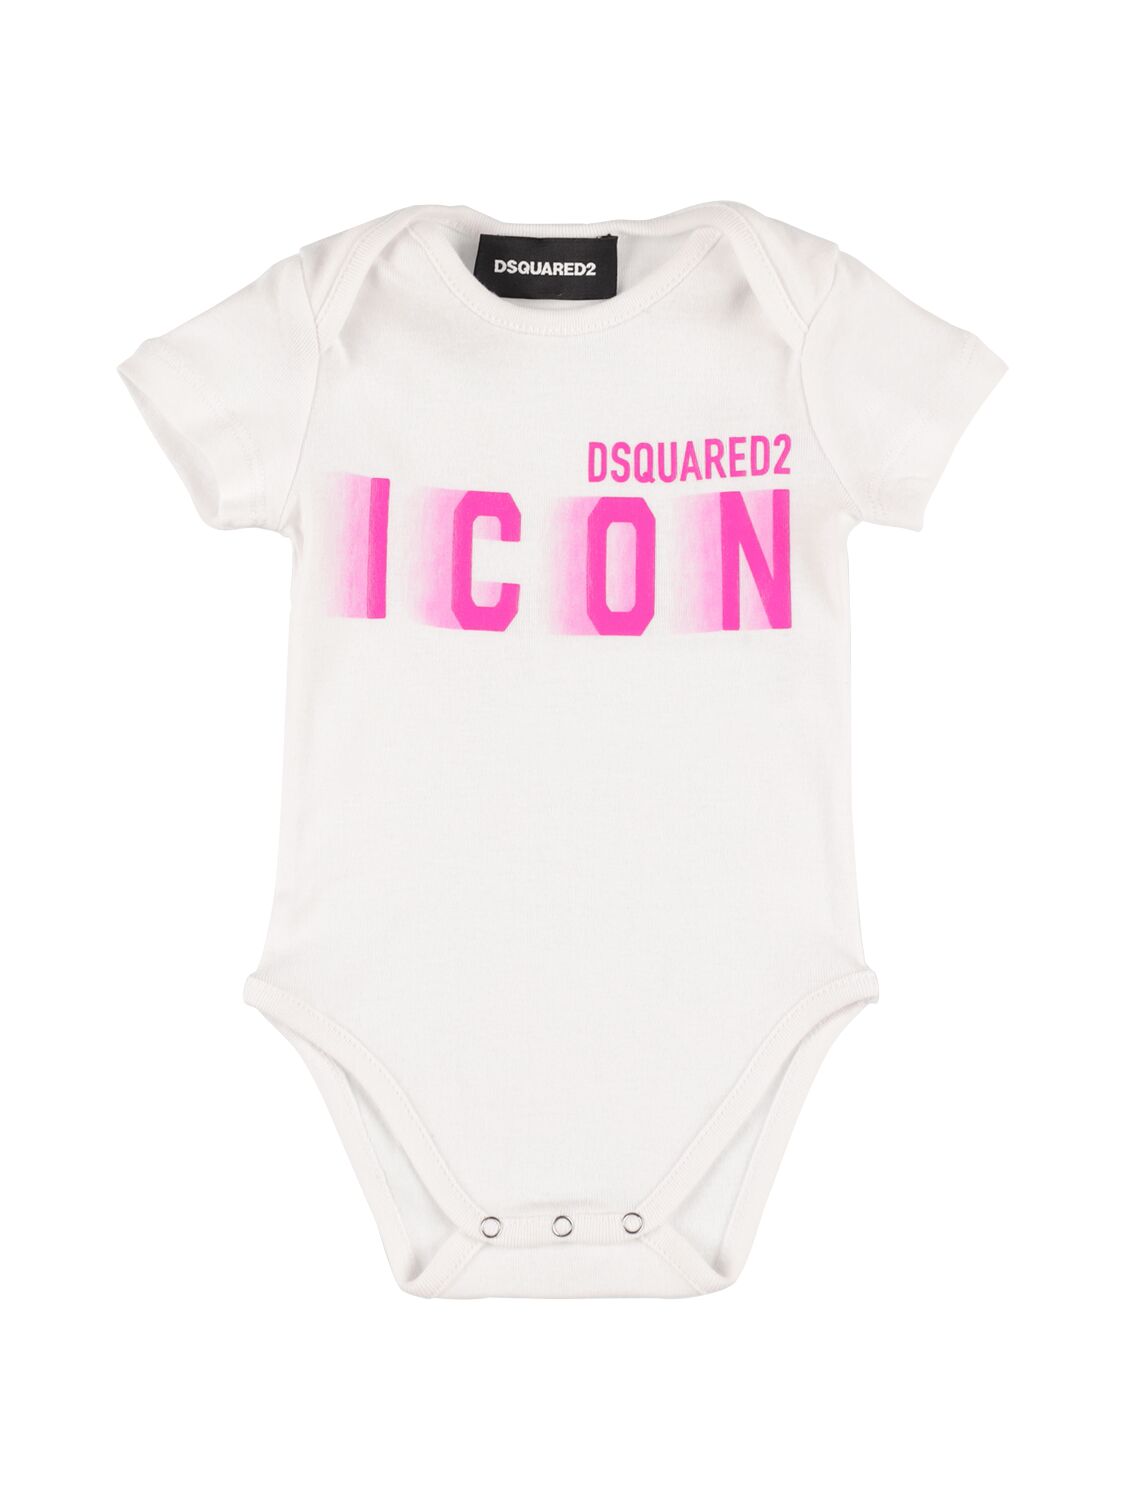 Dsquared2 Babies' 织棉衣身 In White,fuchsia